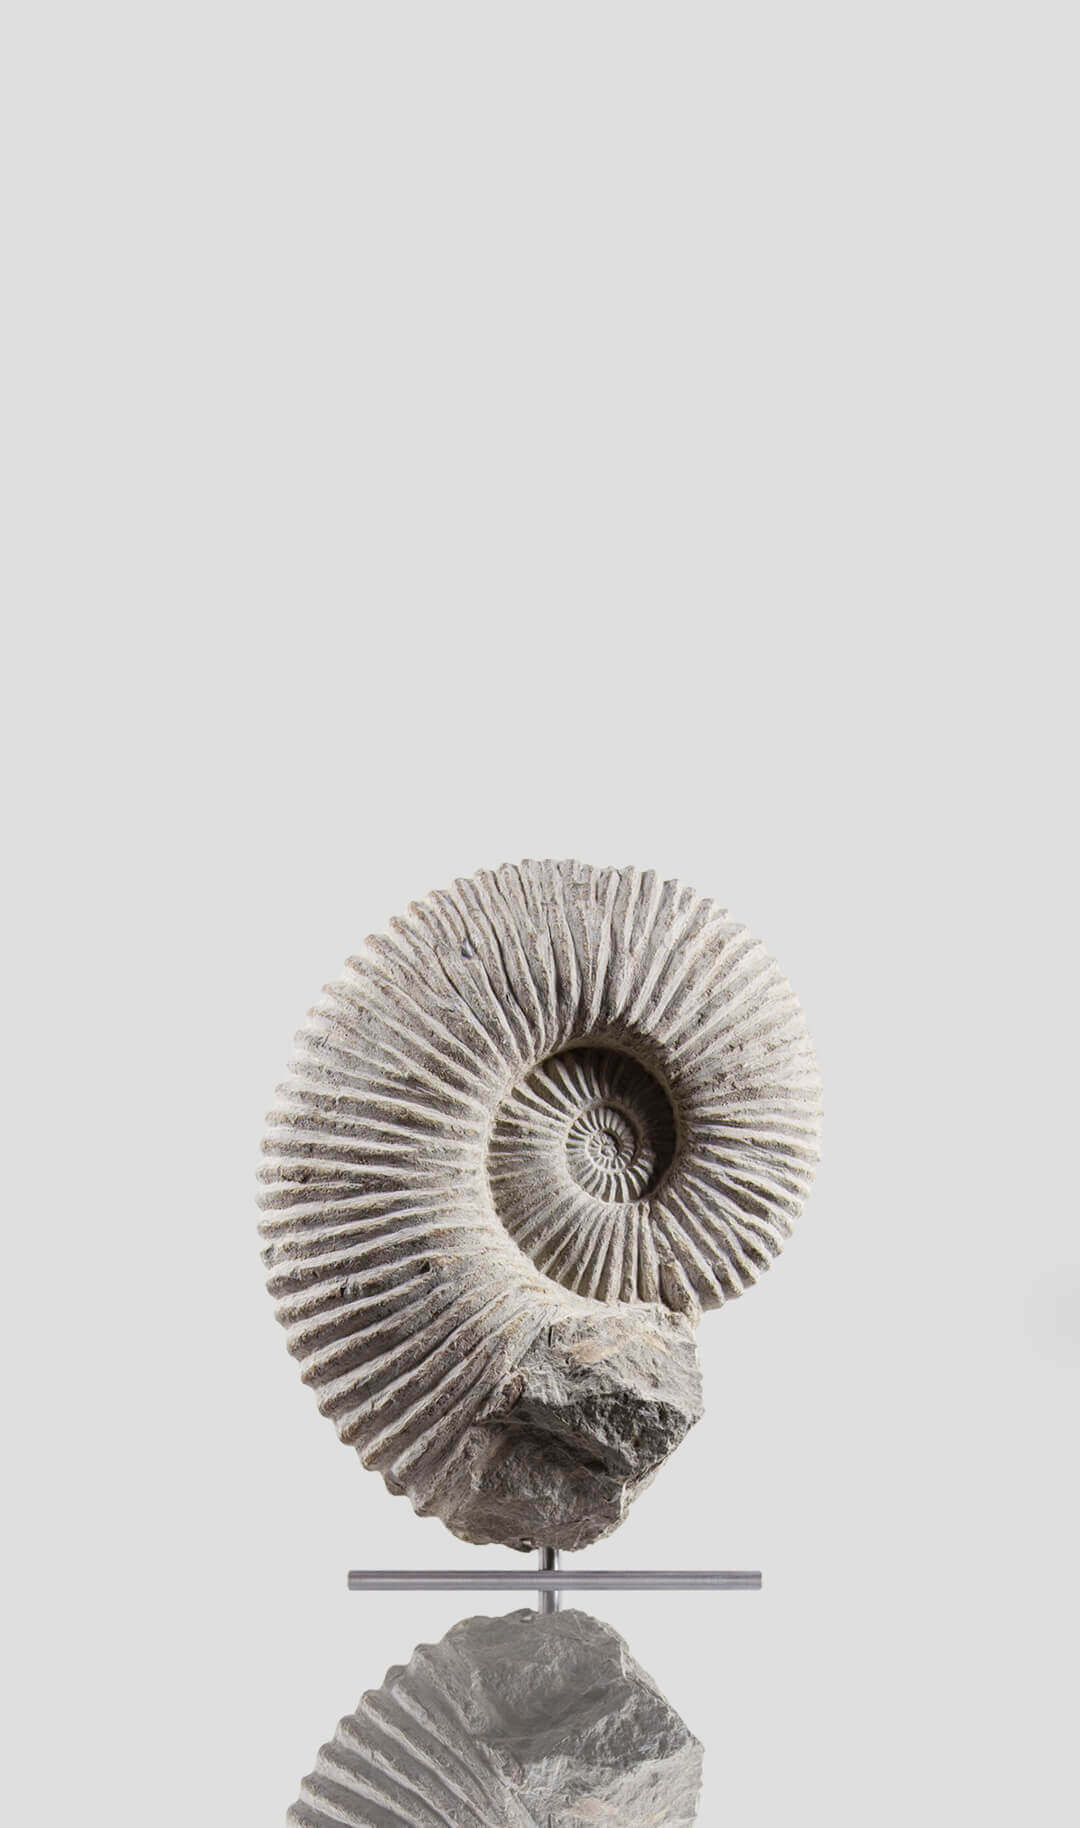 mantelliceras ammonite for sale on stainless steel swivel stand 03